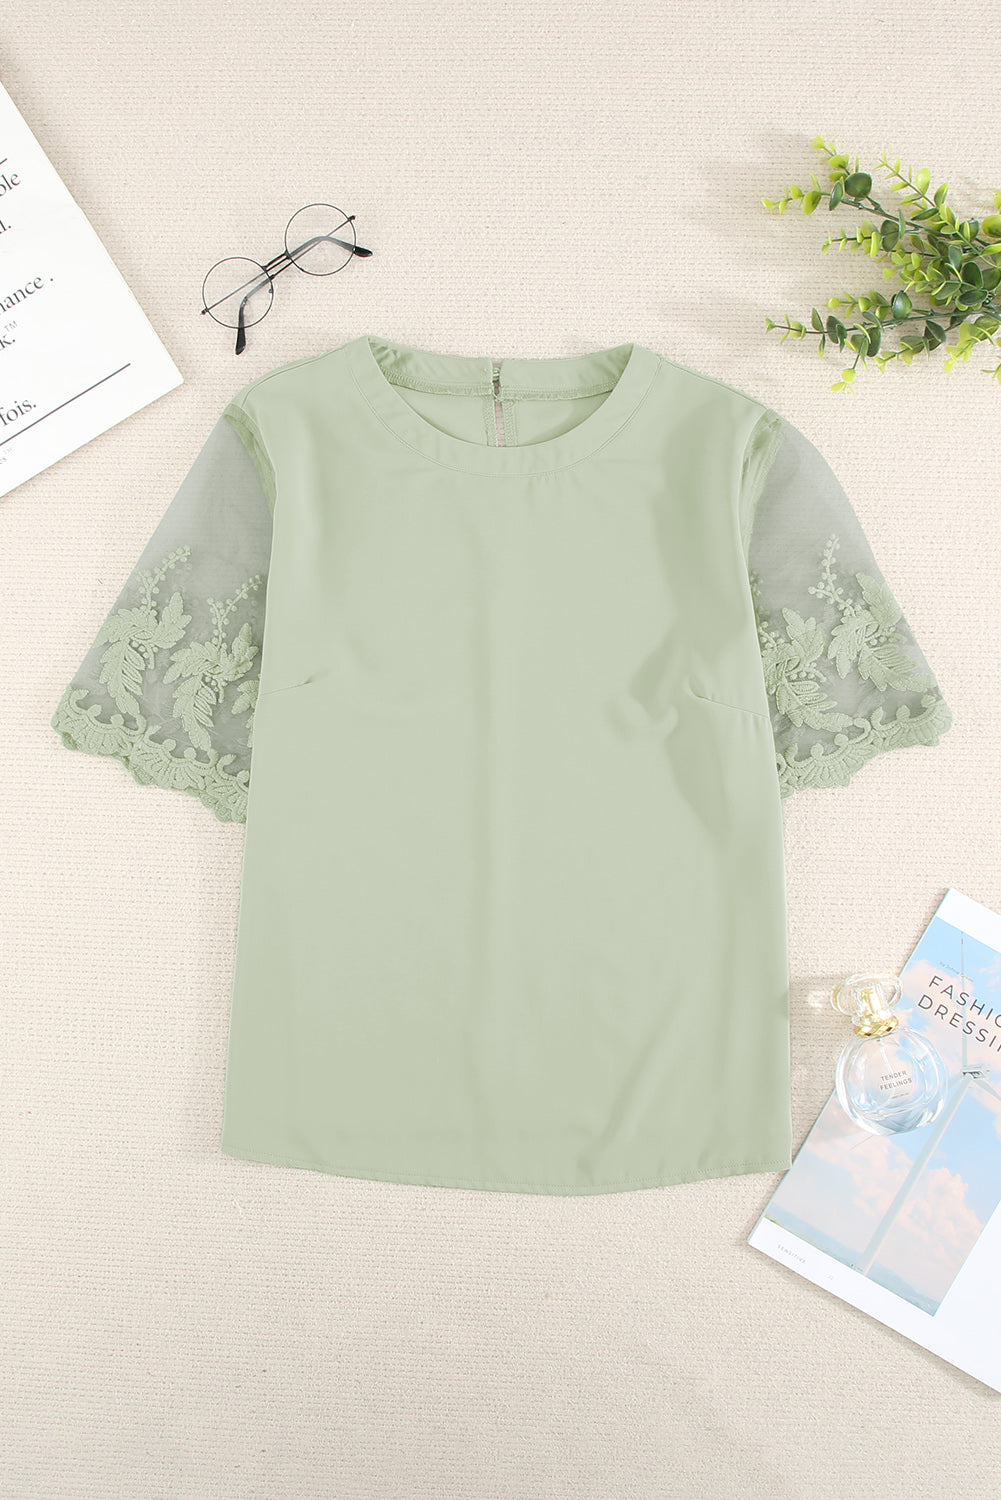 Chic Green Lace Short Sleeve Top